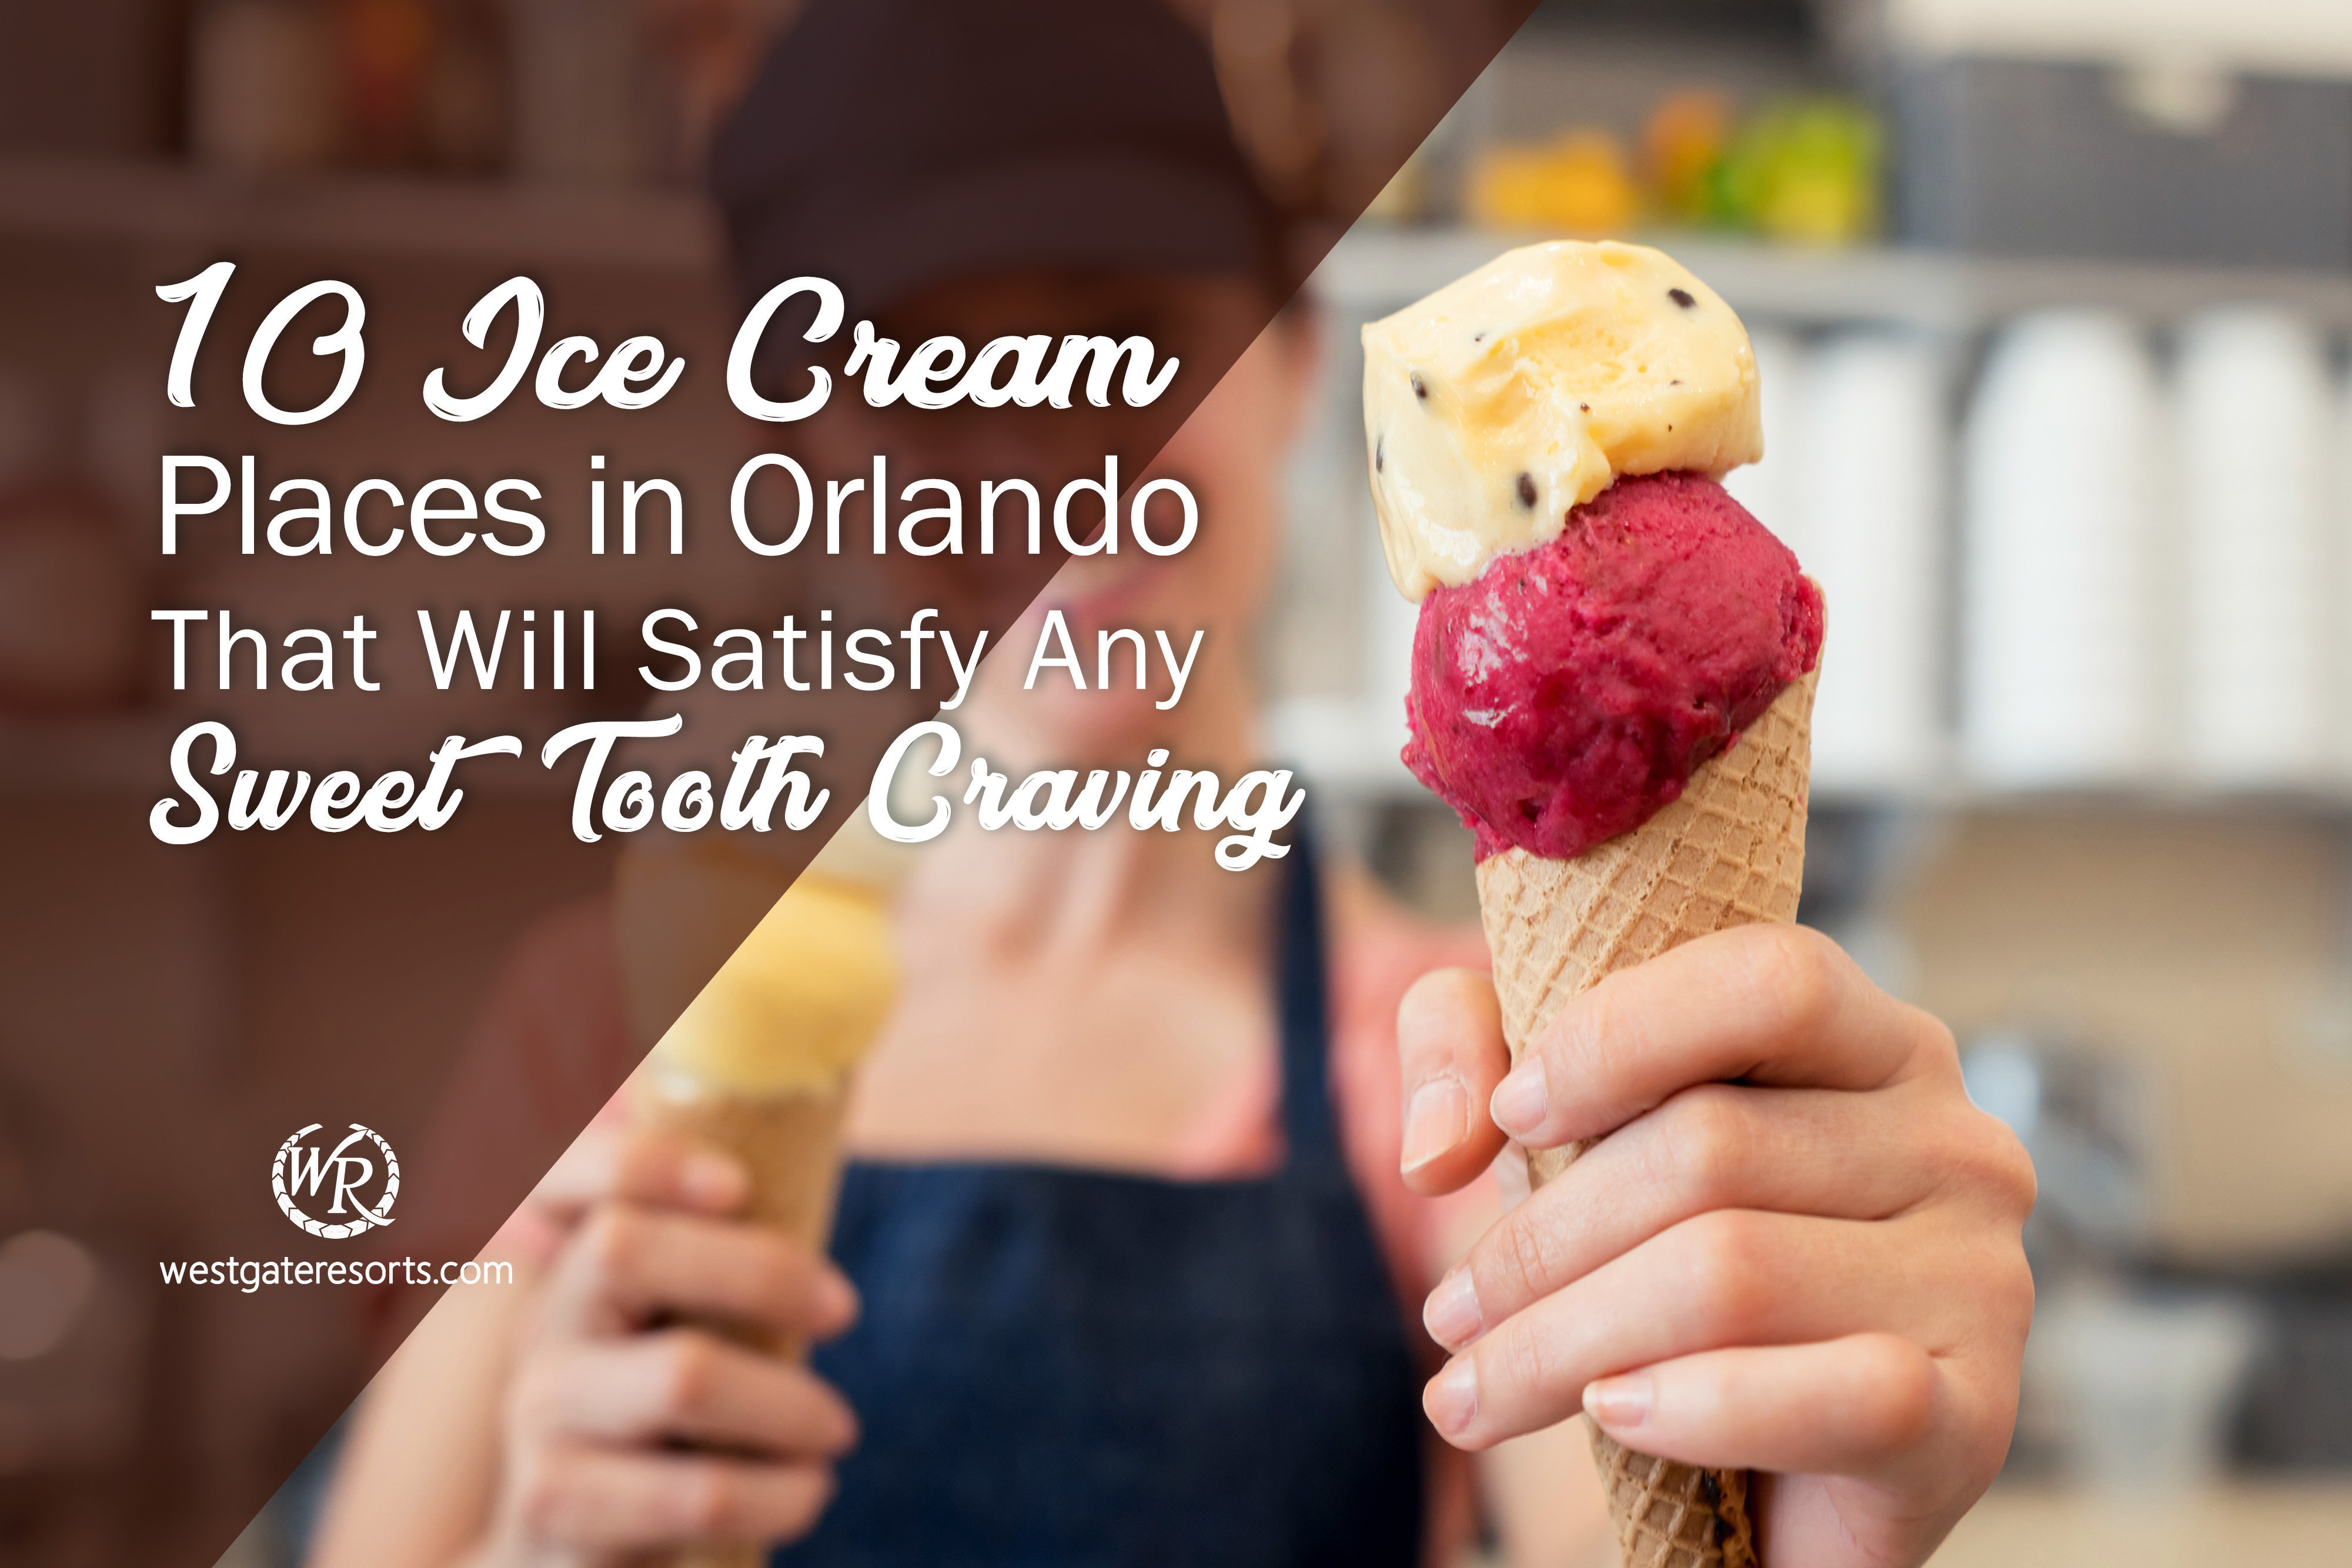 10 Ice Cream Places in Orlando That WIll Satisfy Any Sweet Tooth Craving